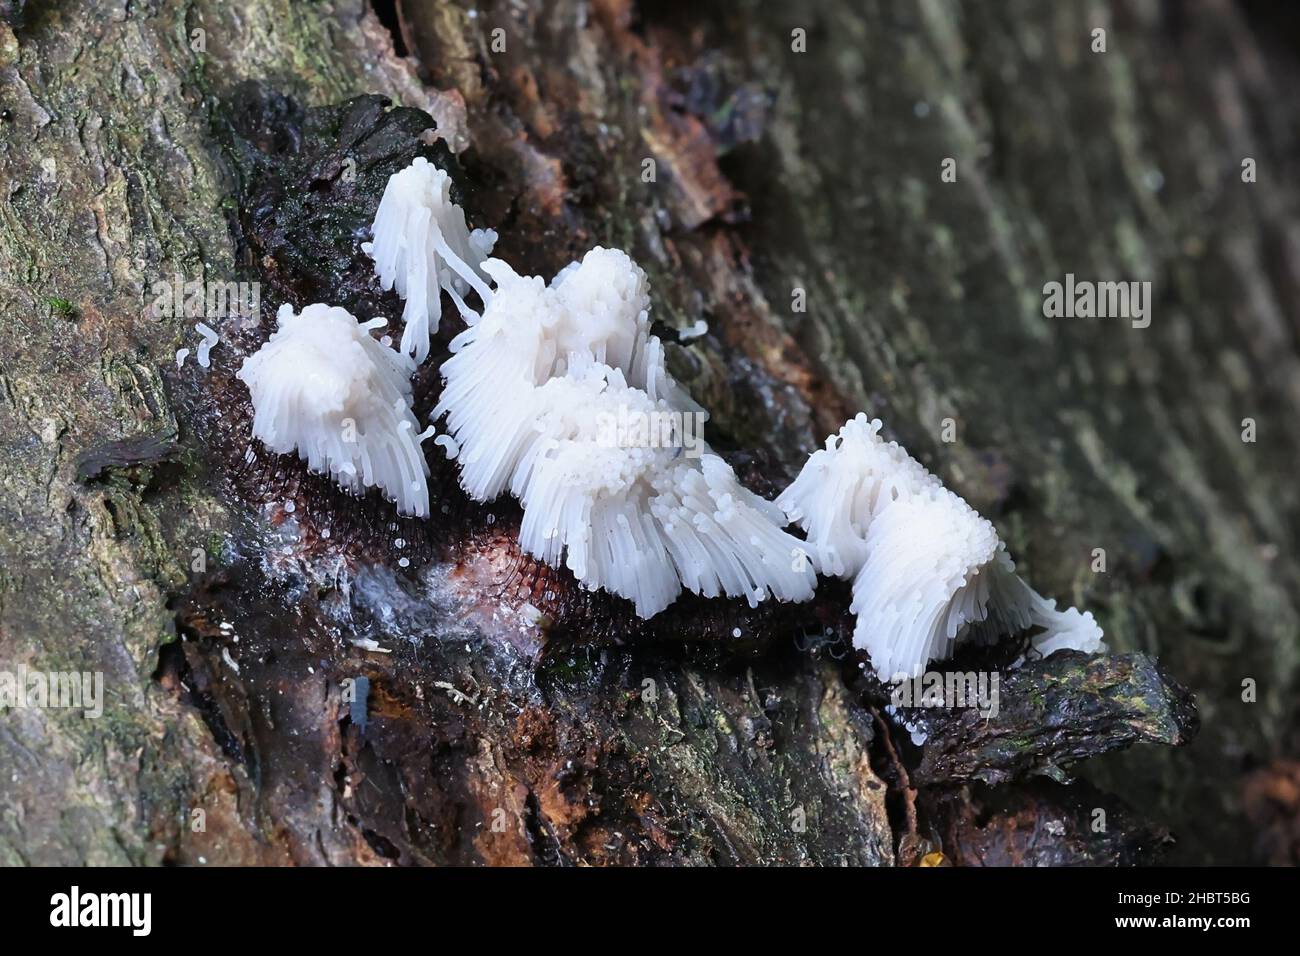 Stemonitis fusca, tube slime mold from Finland with no common English name Stock Photo